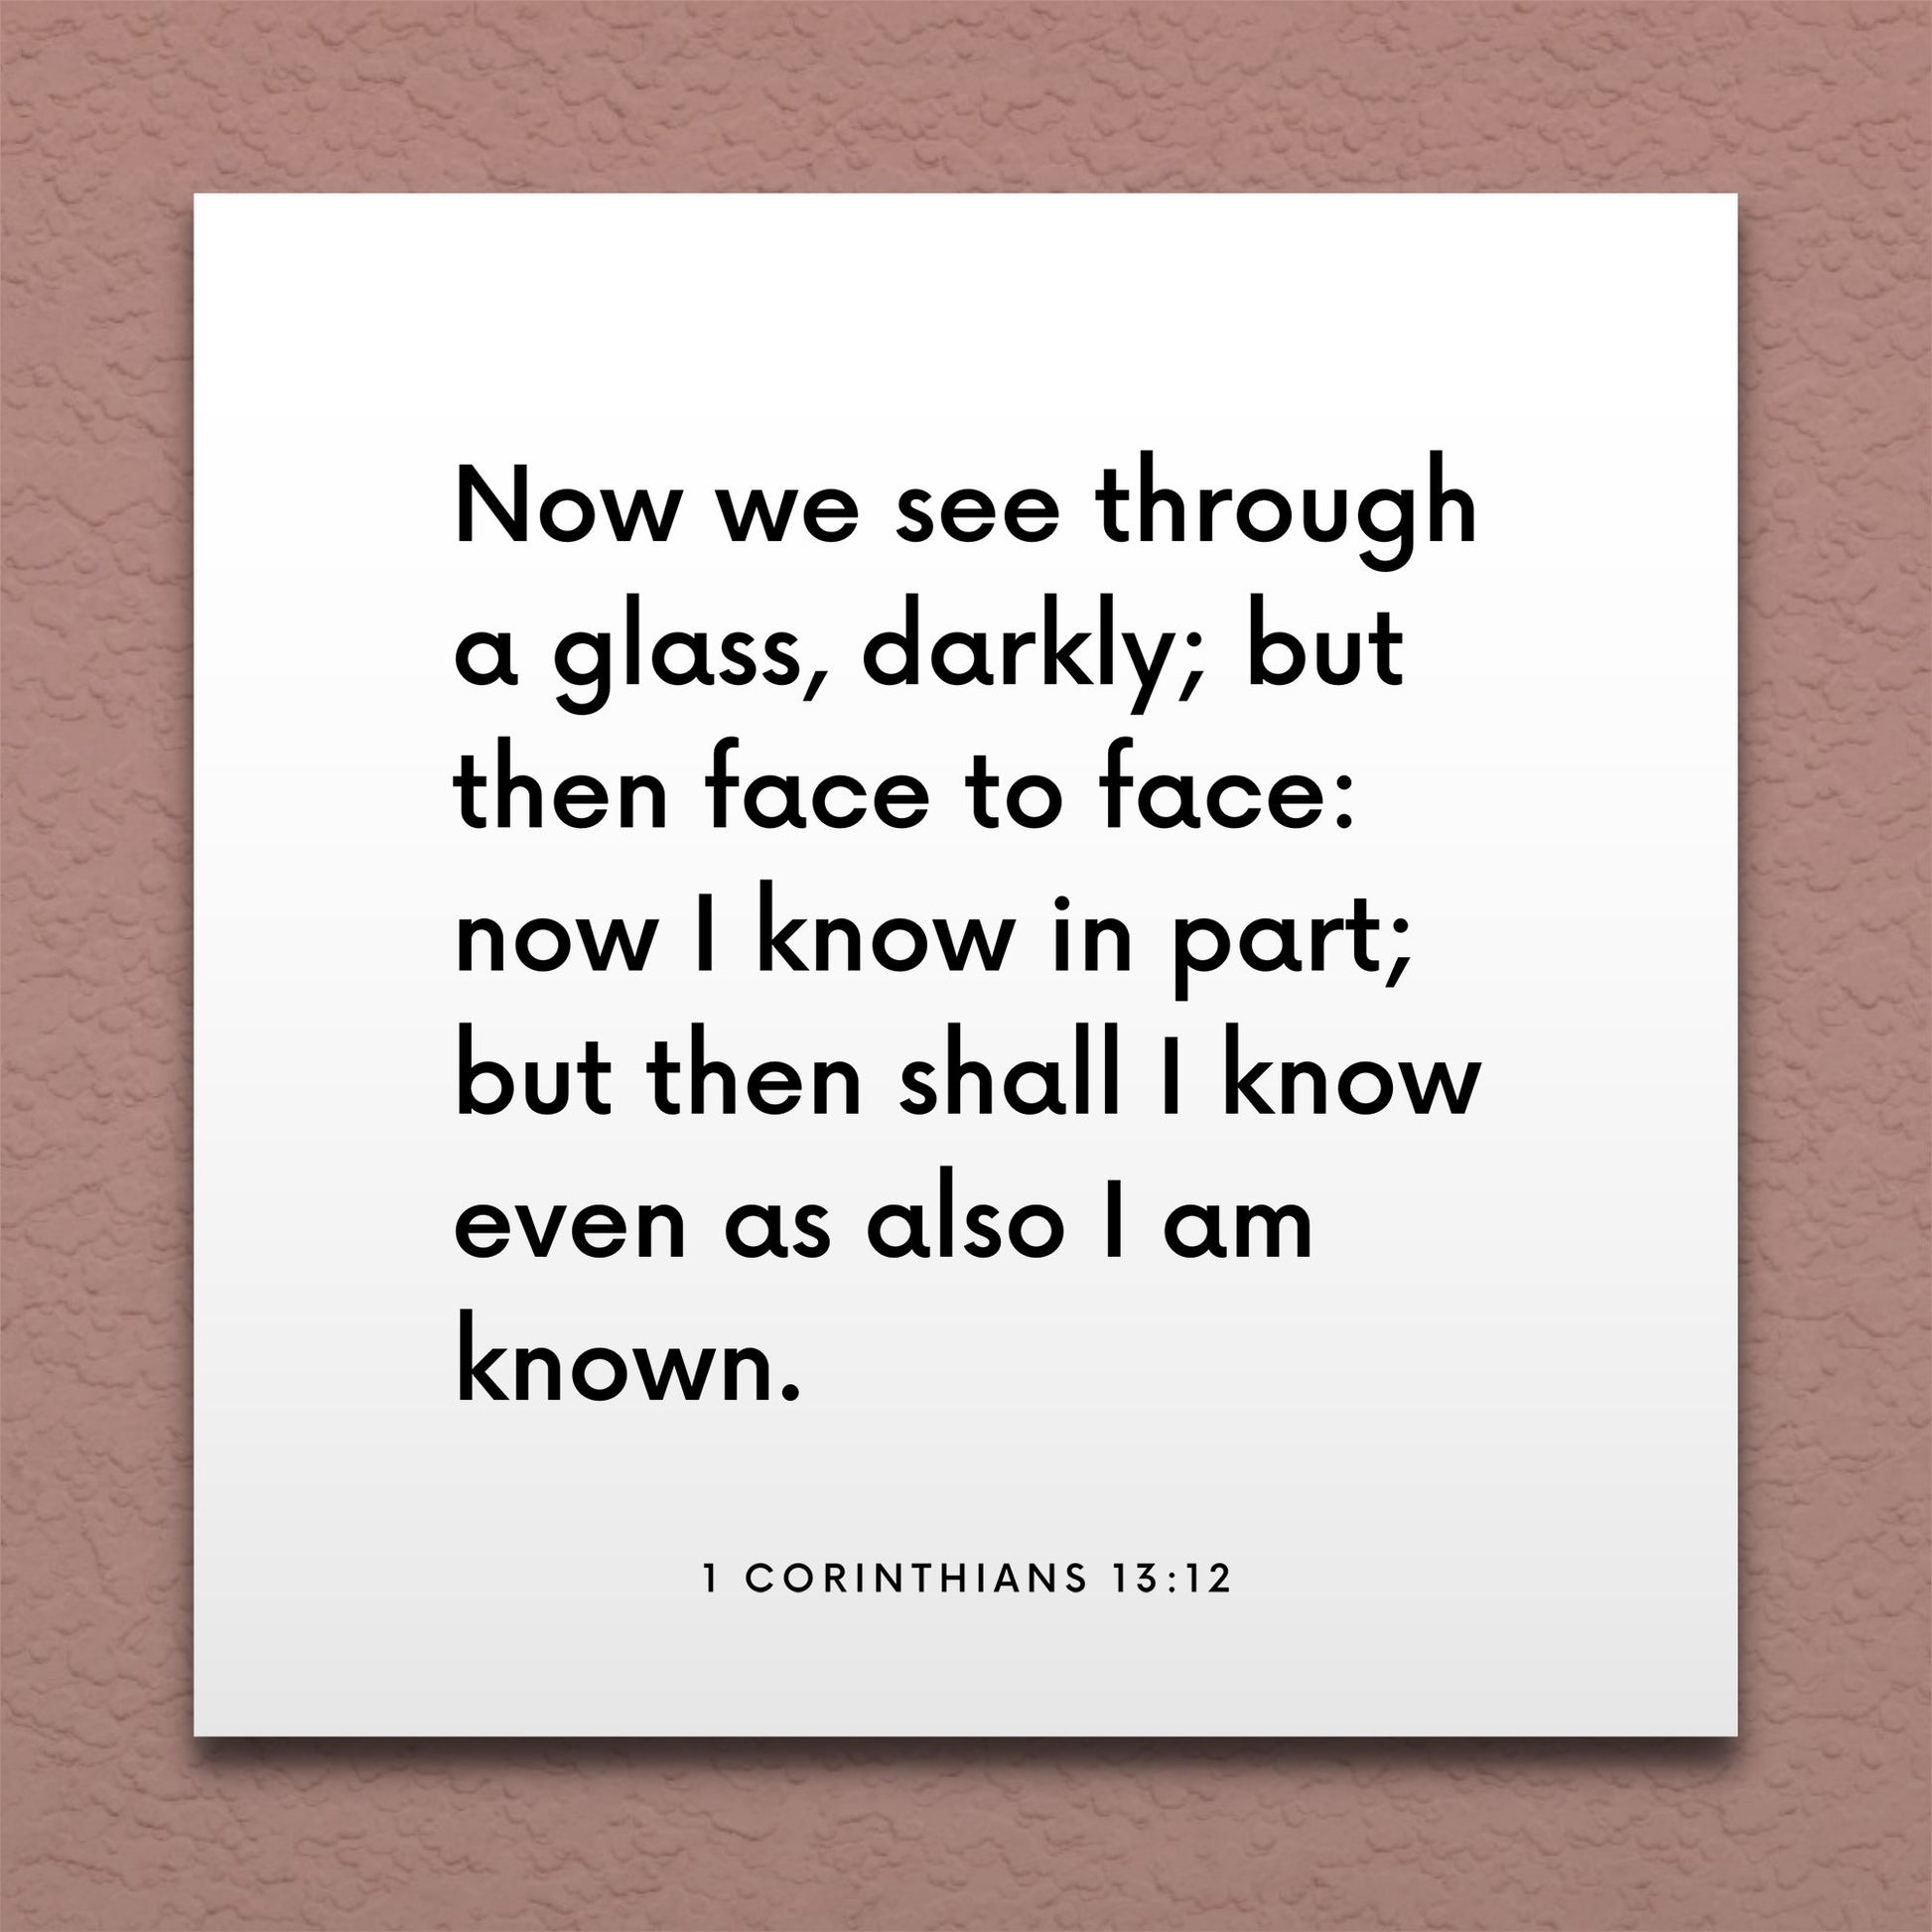 Wall-mounted scripture tile for 1 Corinthians 13:12 - "We see through a glass, darkly"